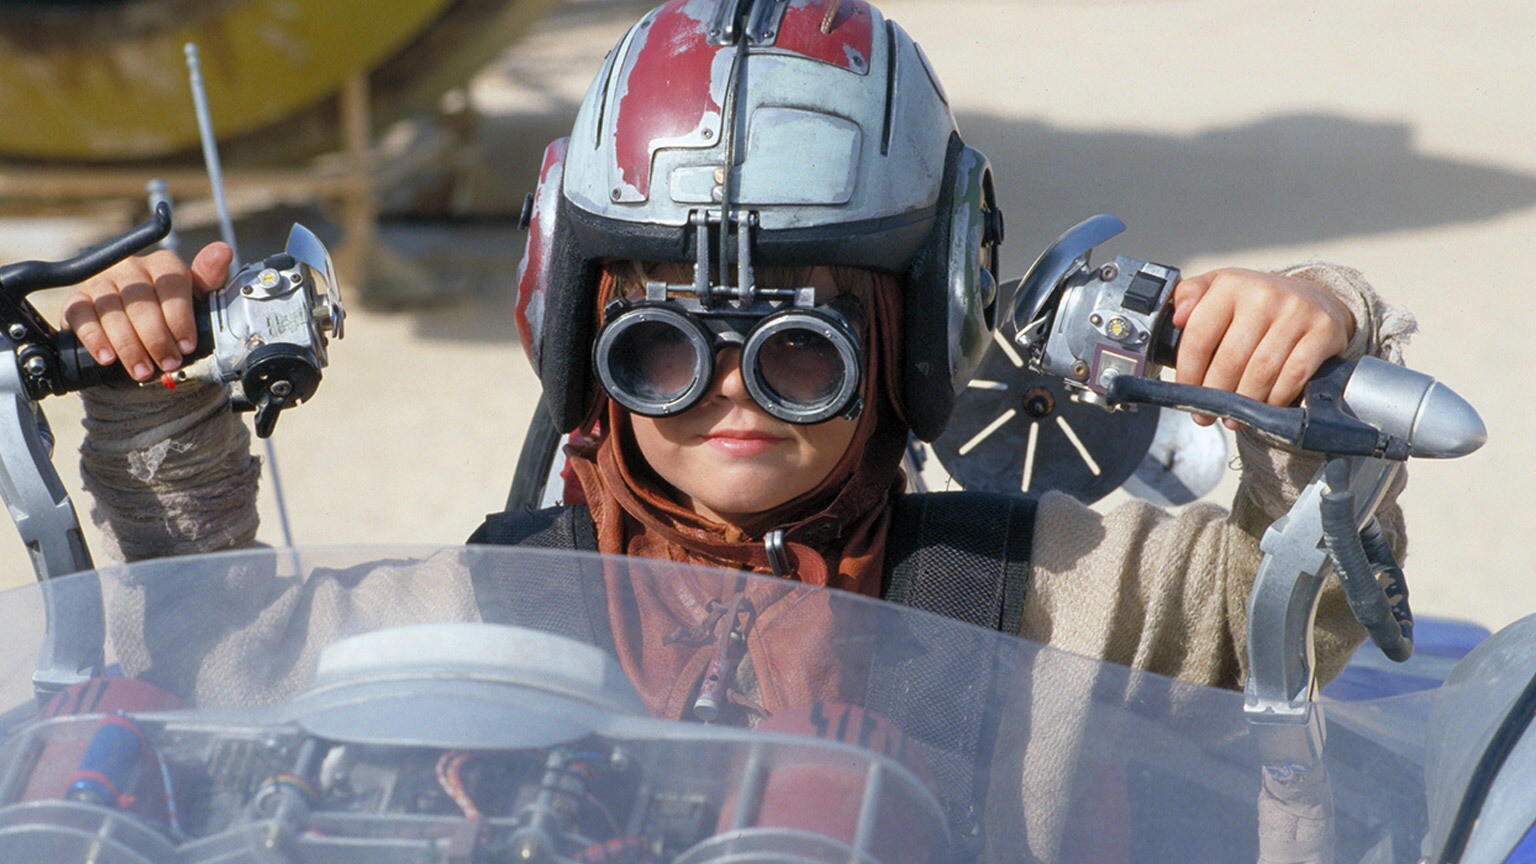 6 Reasons The Phantom Menace Is a Great First Star Wars For Kids